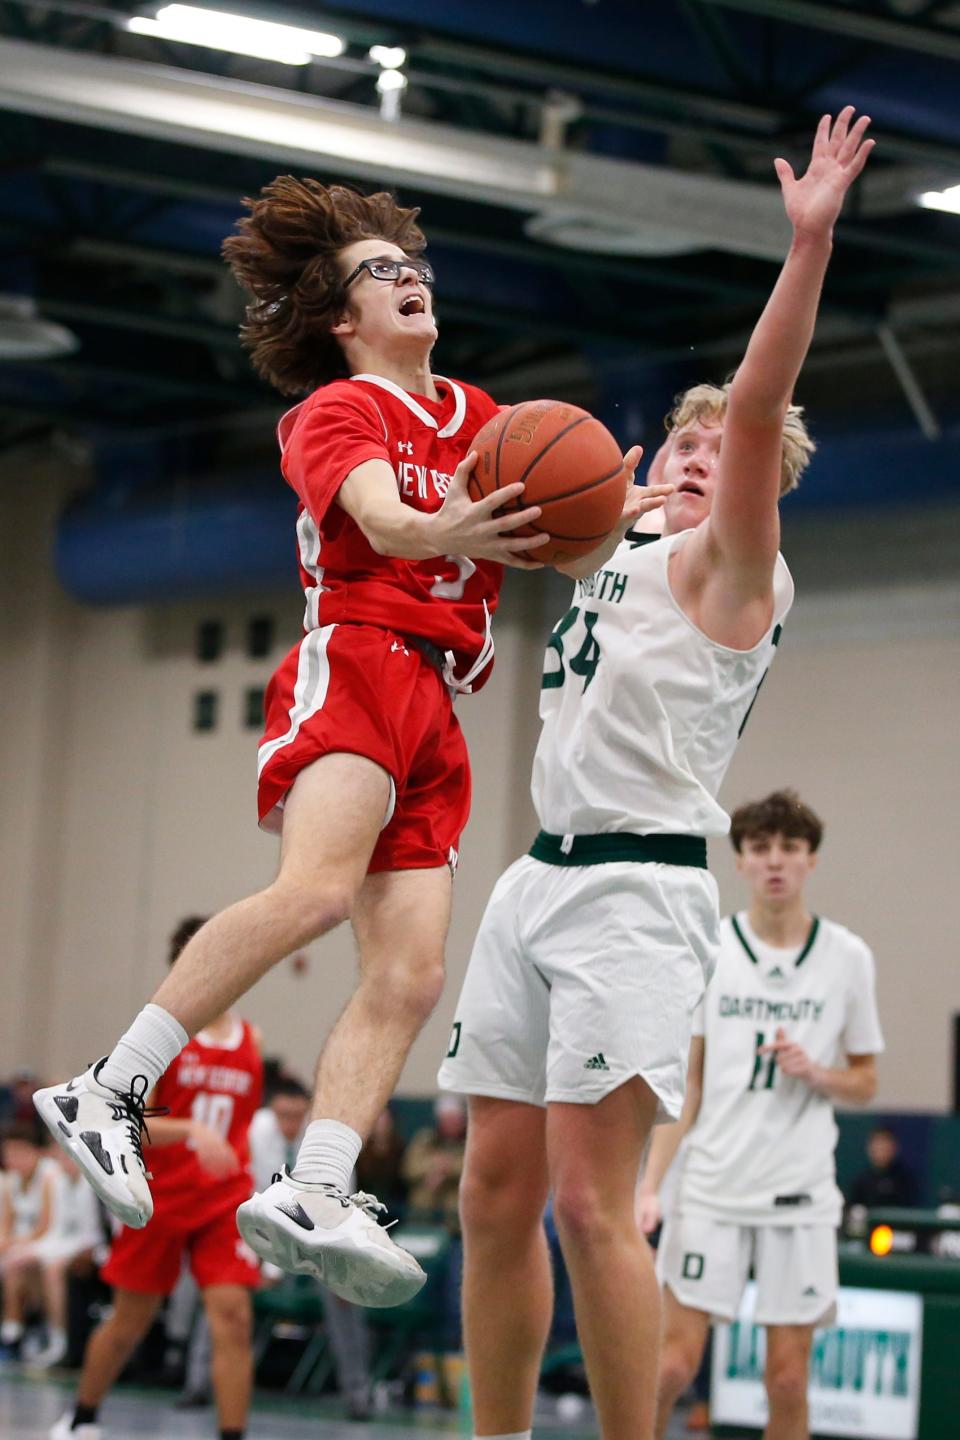 New Bedford's Craig Baptista goes up for the layup as Dartmouth's Hunter Matteson tries to block. Dartmouth High School boys basketball team beat New Bedford High School at home.